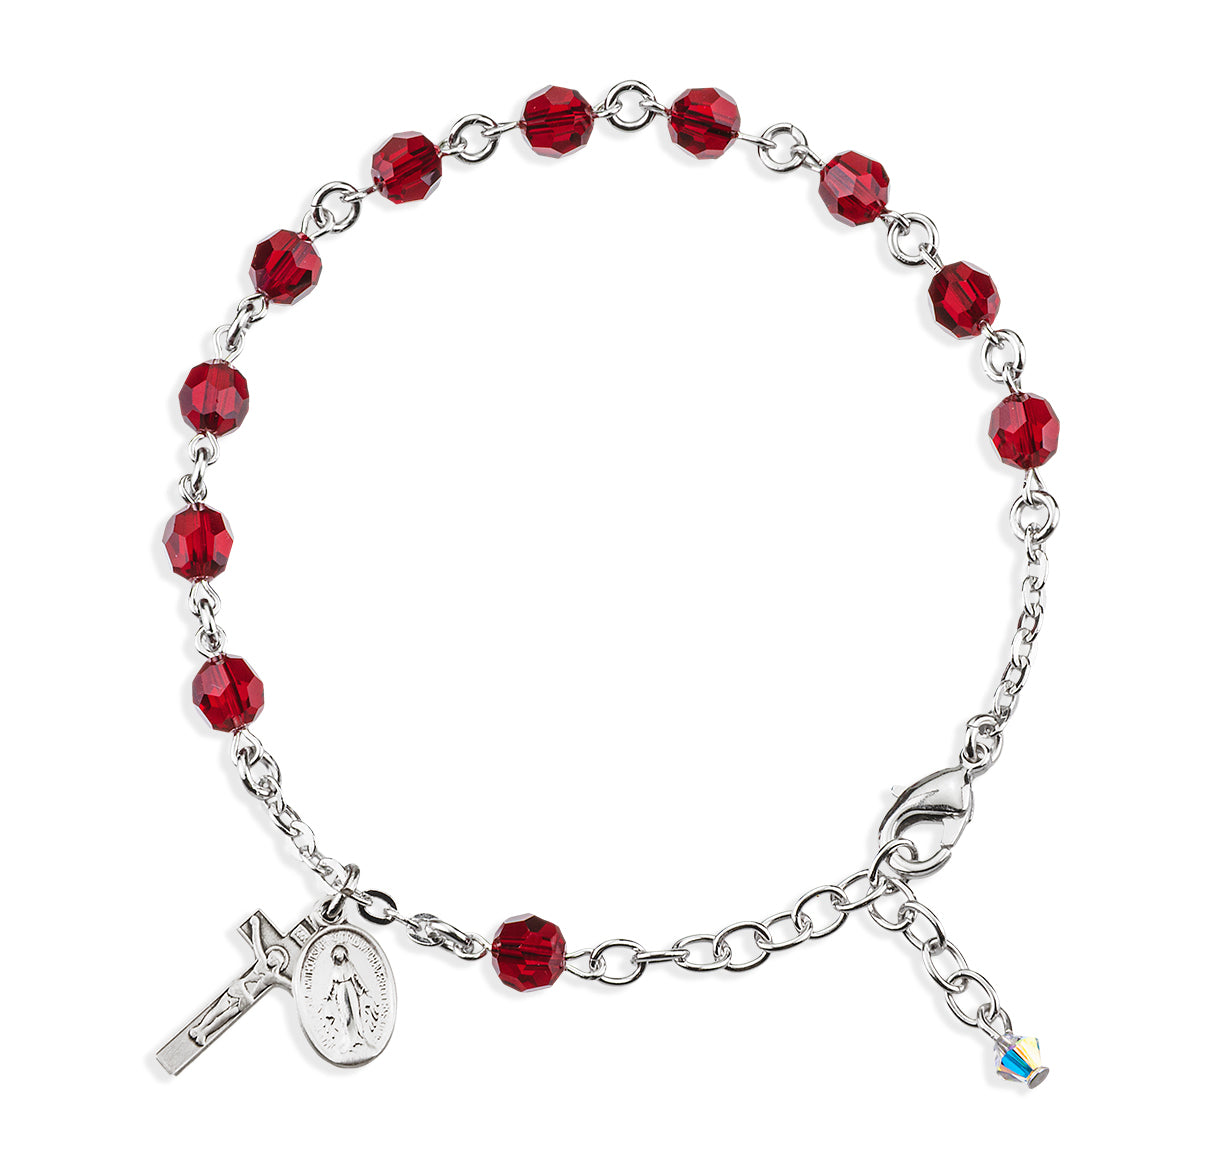 Sterling Silver Rosary Bracelet Created with 6mm Ruby Swarovski Crystal Round Beads by HMH